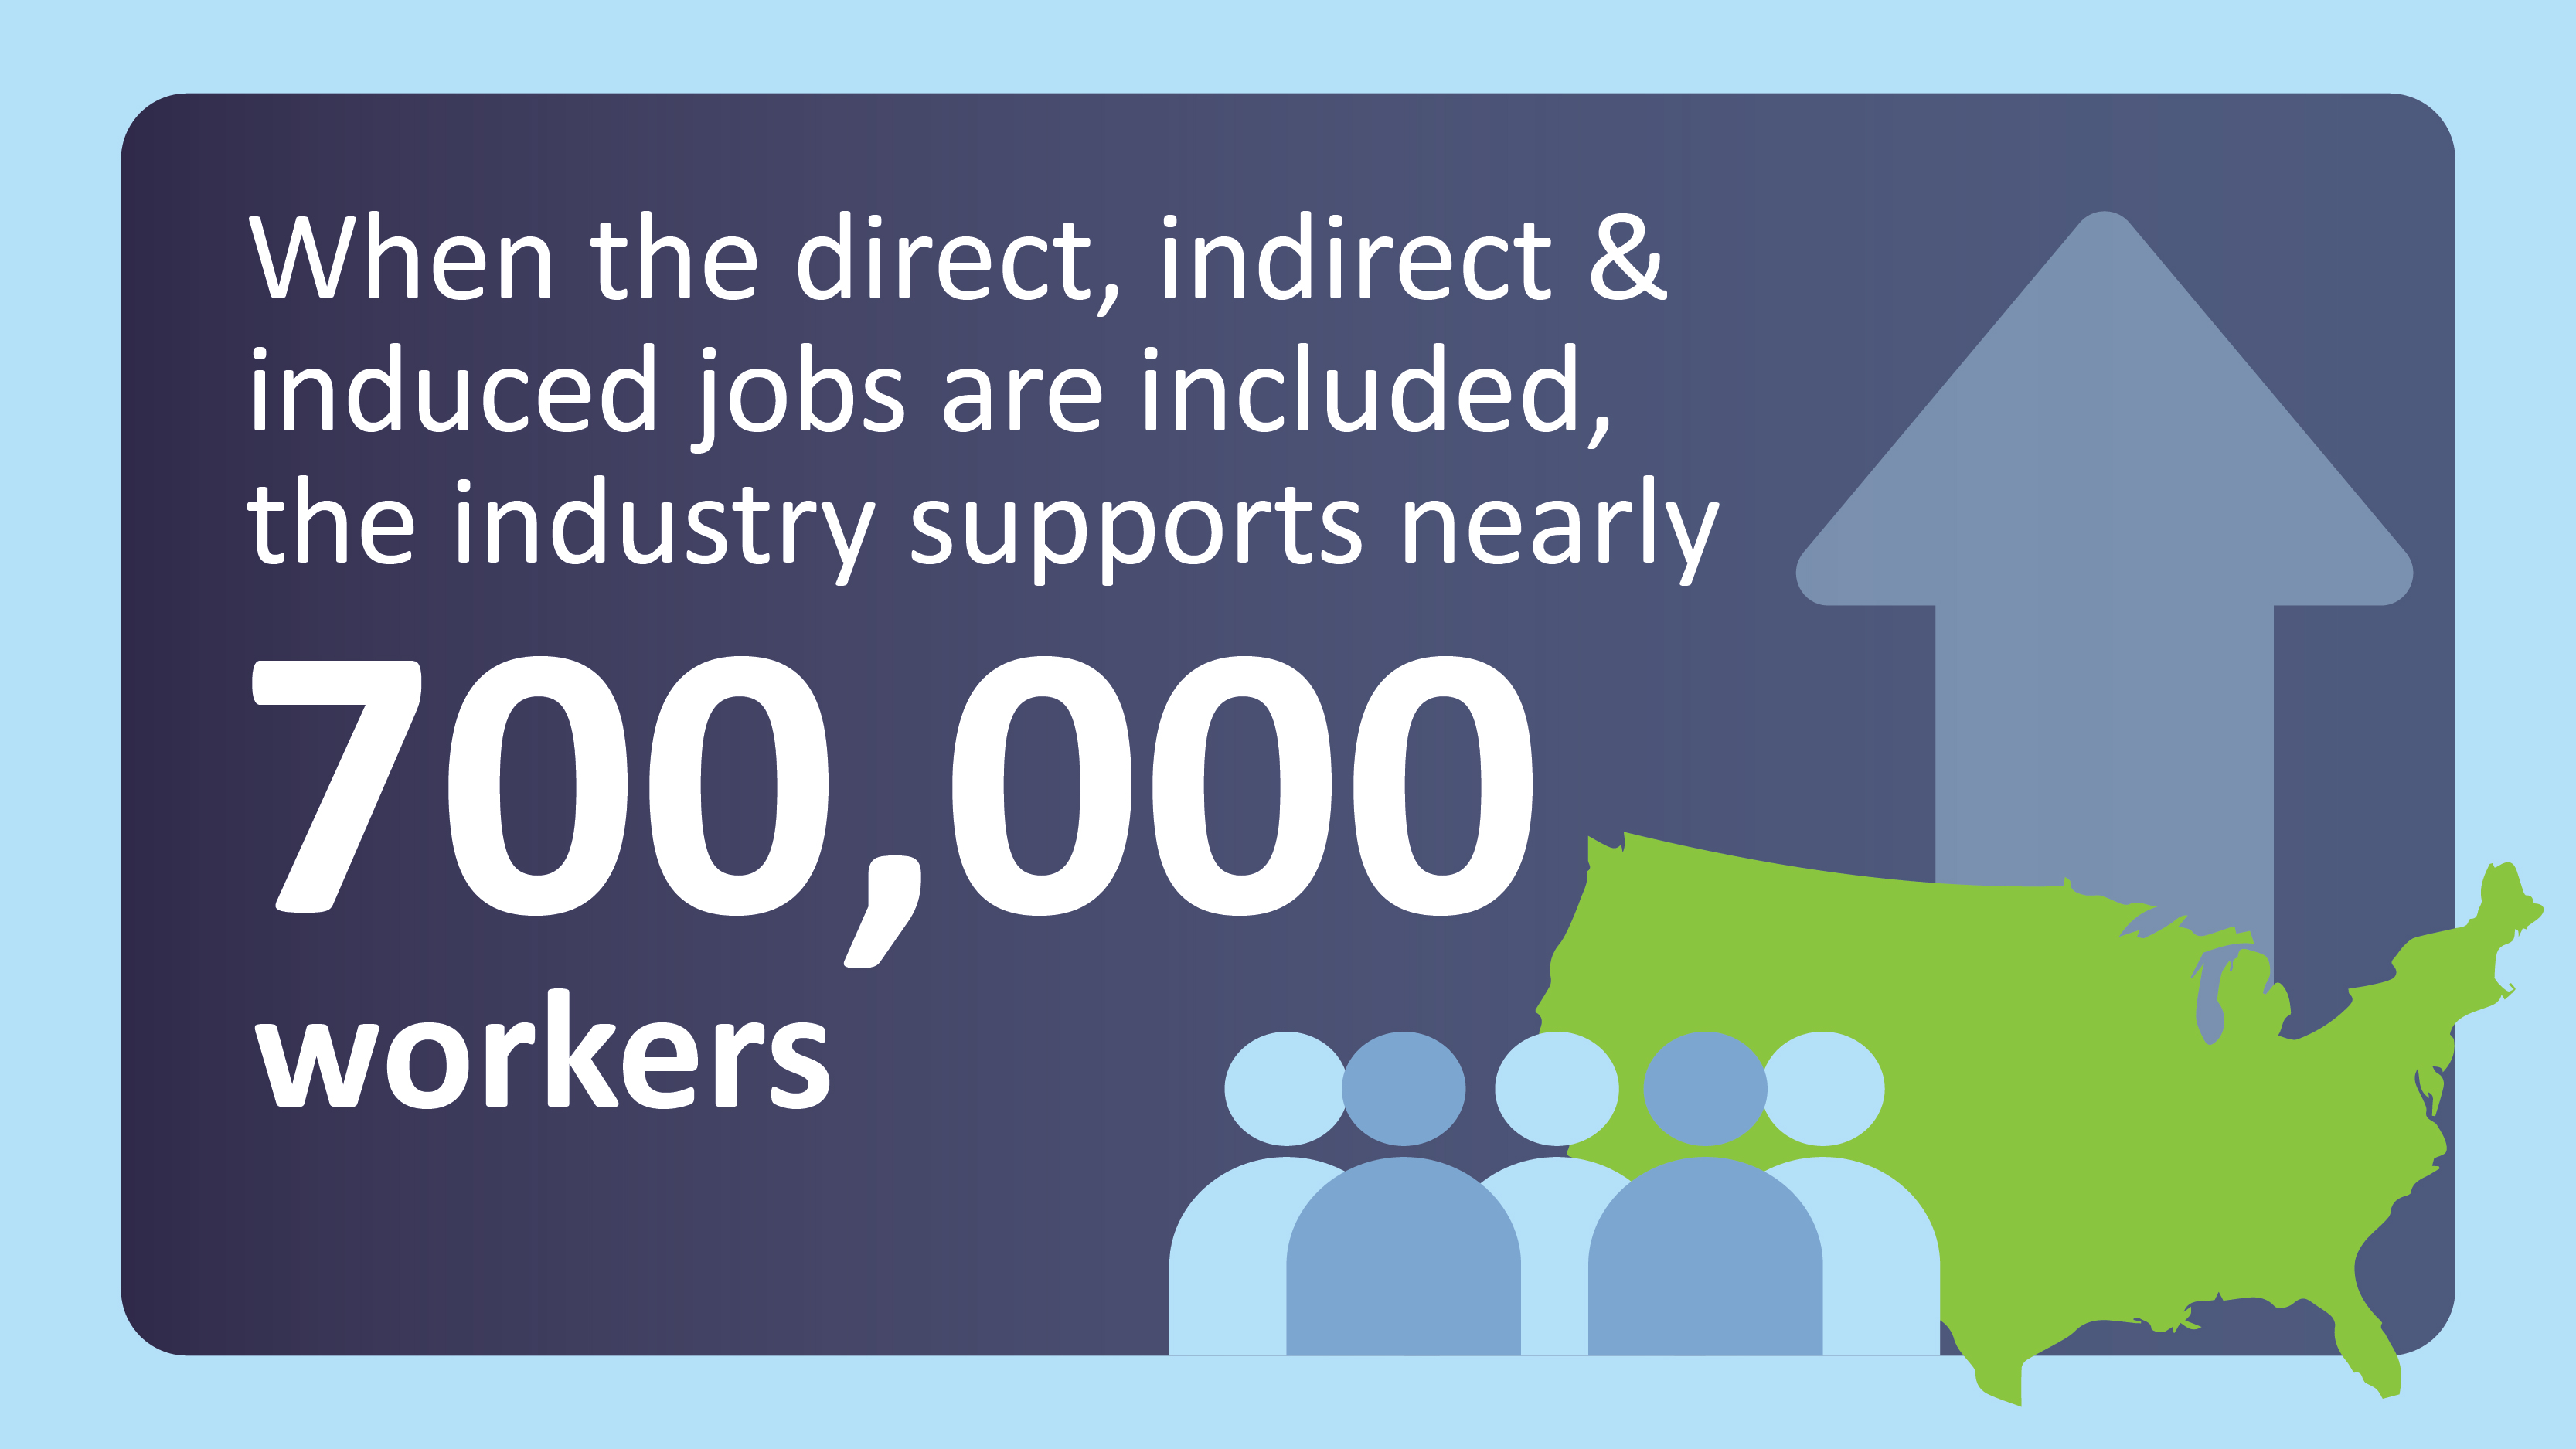 When the direct, indirect & induced jobs are included, the industry supports nearly 700,000 workers